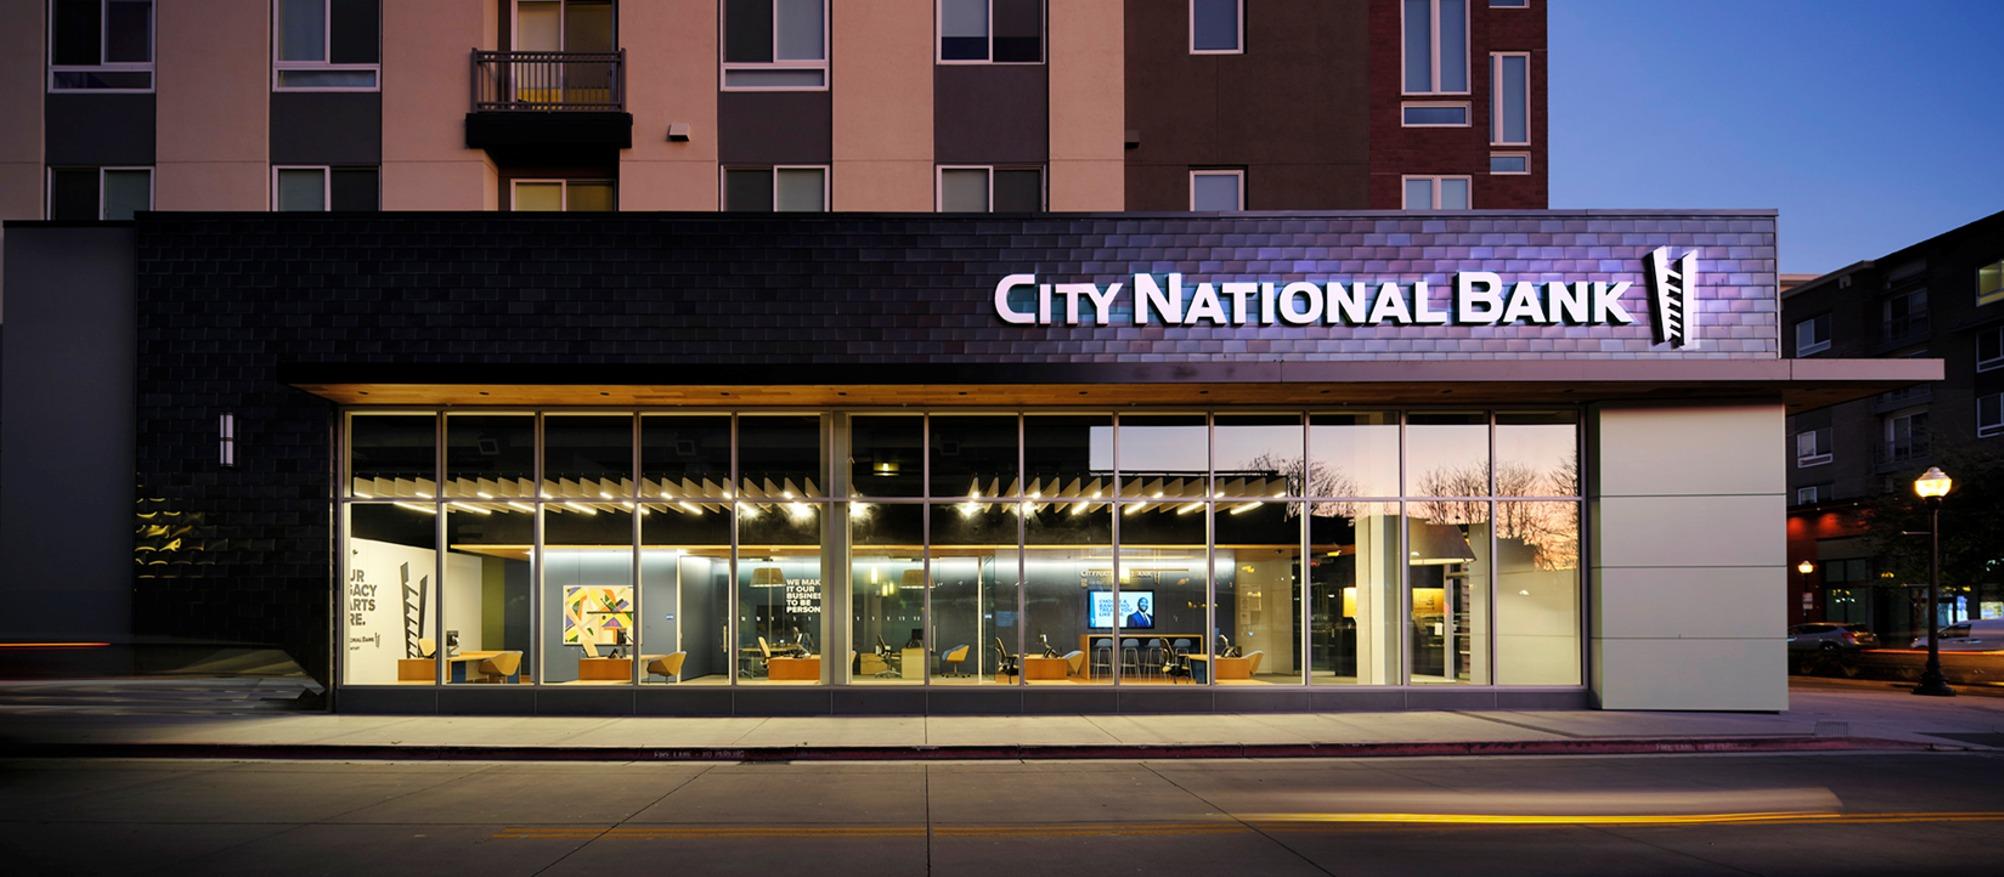 City National Bank branch in Sunnyvale at night. City National Bank Sunnyvale (408)962-3400